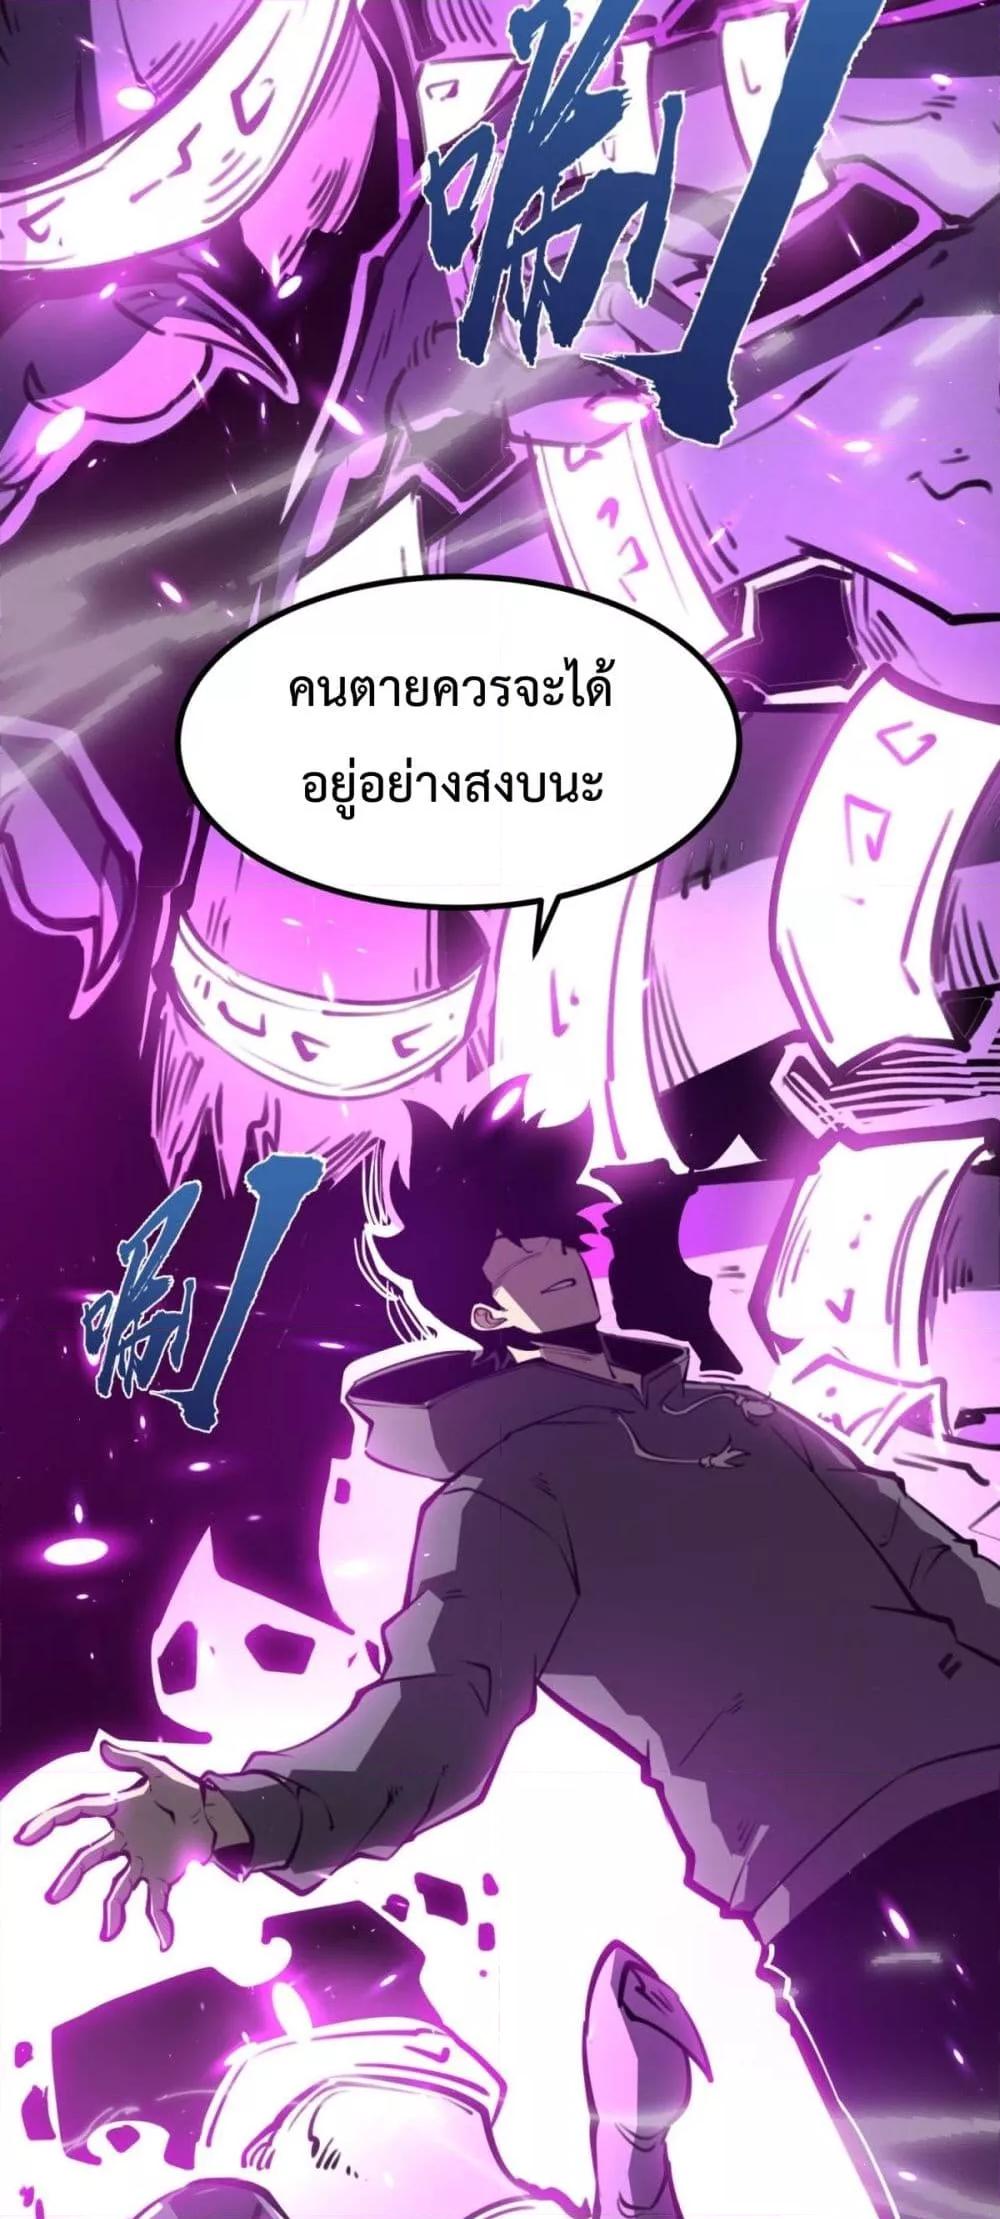 I Became The King by Scavenging โ€“ เนเธเนเธฅเน เน€เธฅเน€เธงเนเธฅเธฅเธฃเธดเนเธ เธ•เธญเธเธ—เธตเน 17 (28)